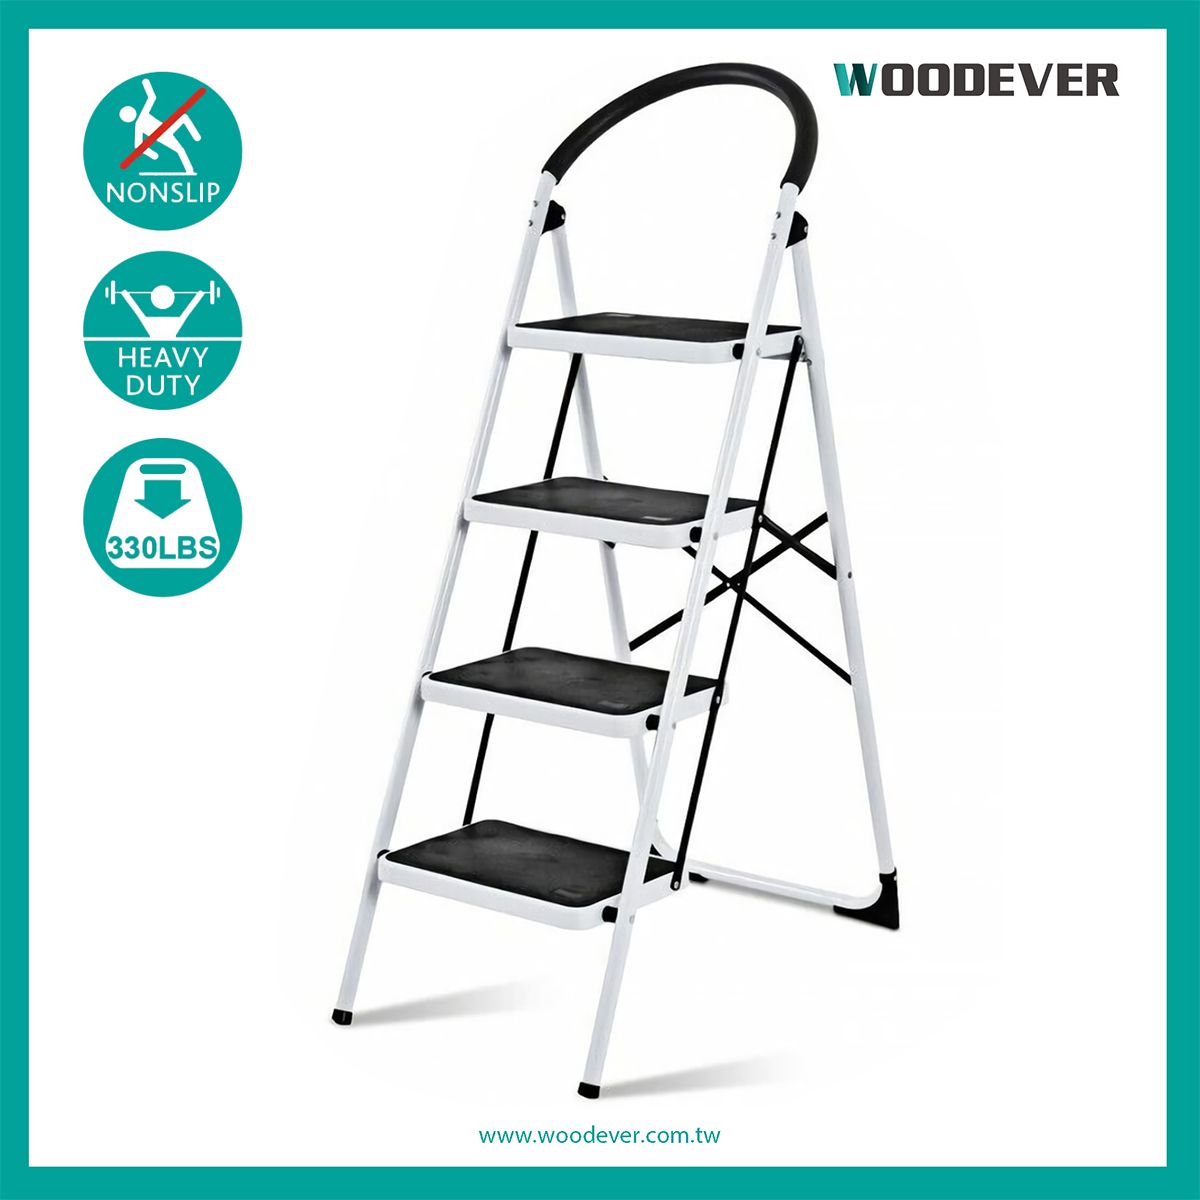 330 lbs heavy-duty folding steel step ladder OEM service supplier  Featuring a sturdy steel frame with rubber support, this step ladder can bear up to 330 lbs of loading weight, becoming an indispensable handling tool for industrial workplaces.